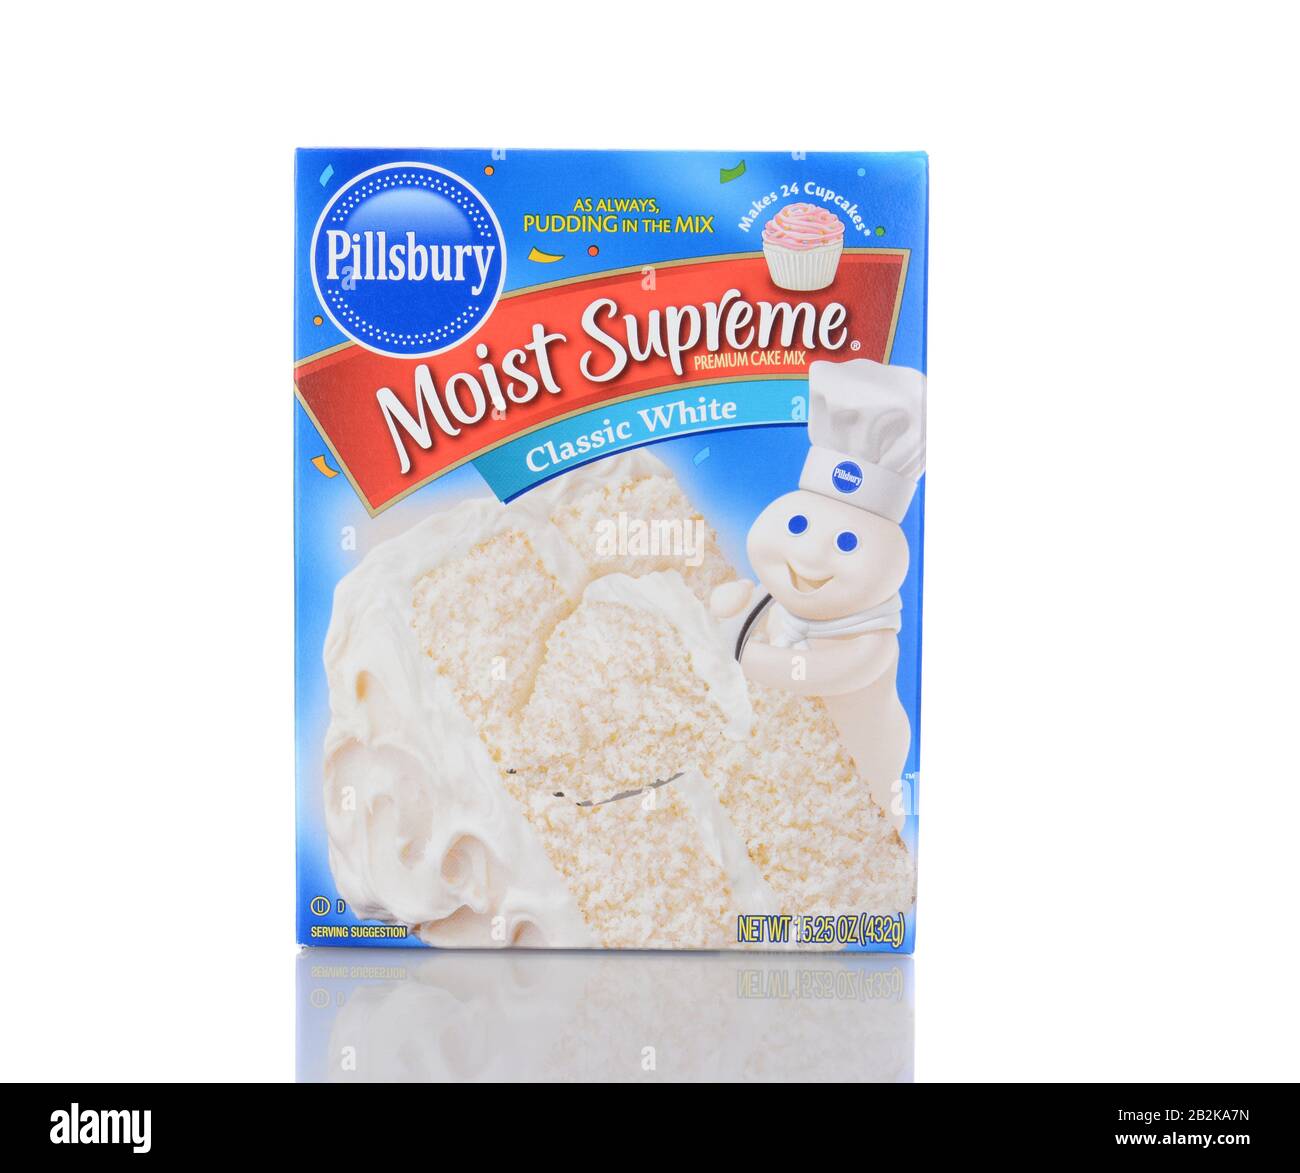 IRVINE, CA - January 05, 2014: Pillsbury Moist Supreme Classic White Cake Mix. Pillsbury founded in 1872 by Charles Alfred Pillsbury, is now owned by Stock Photo